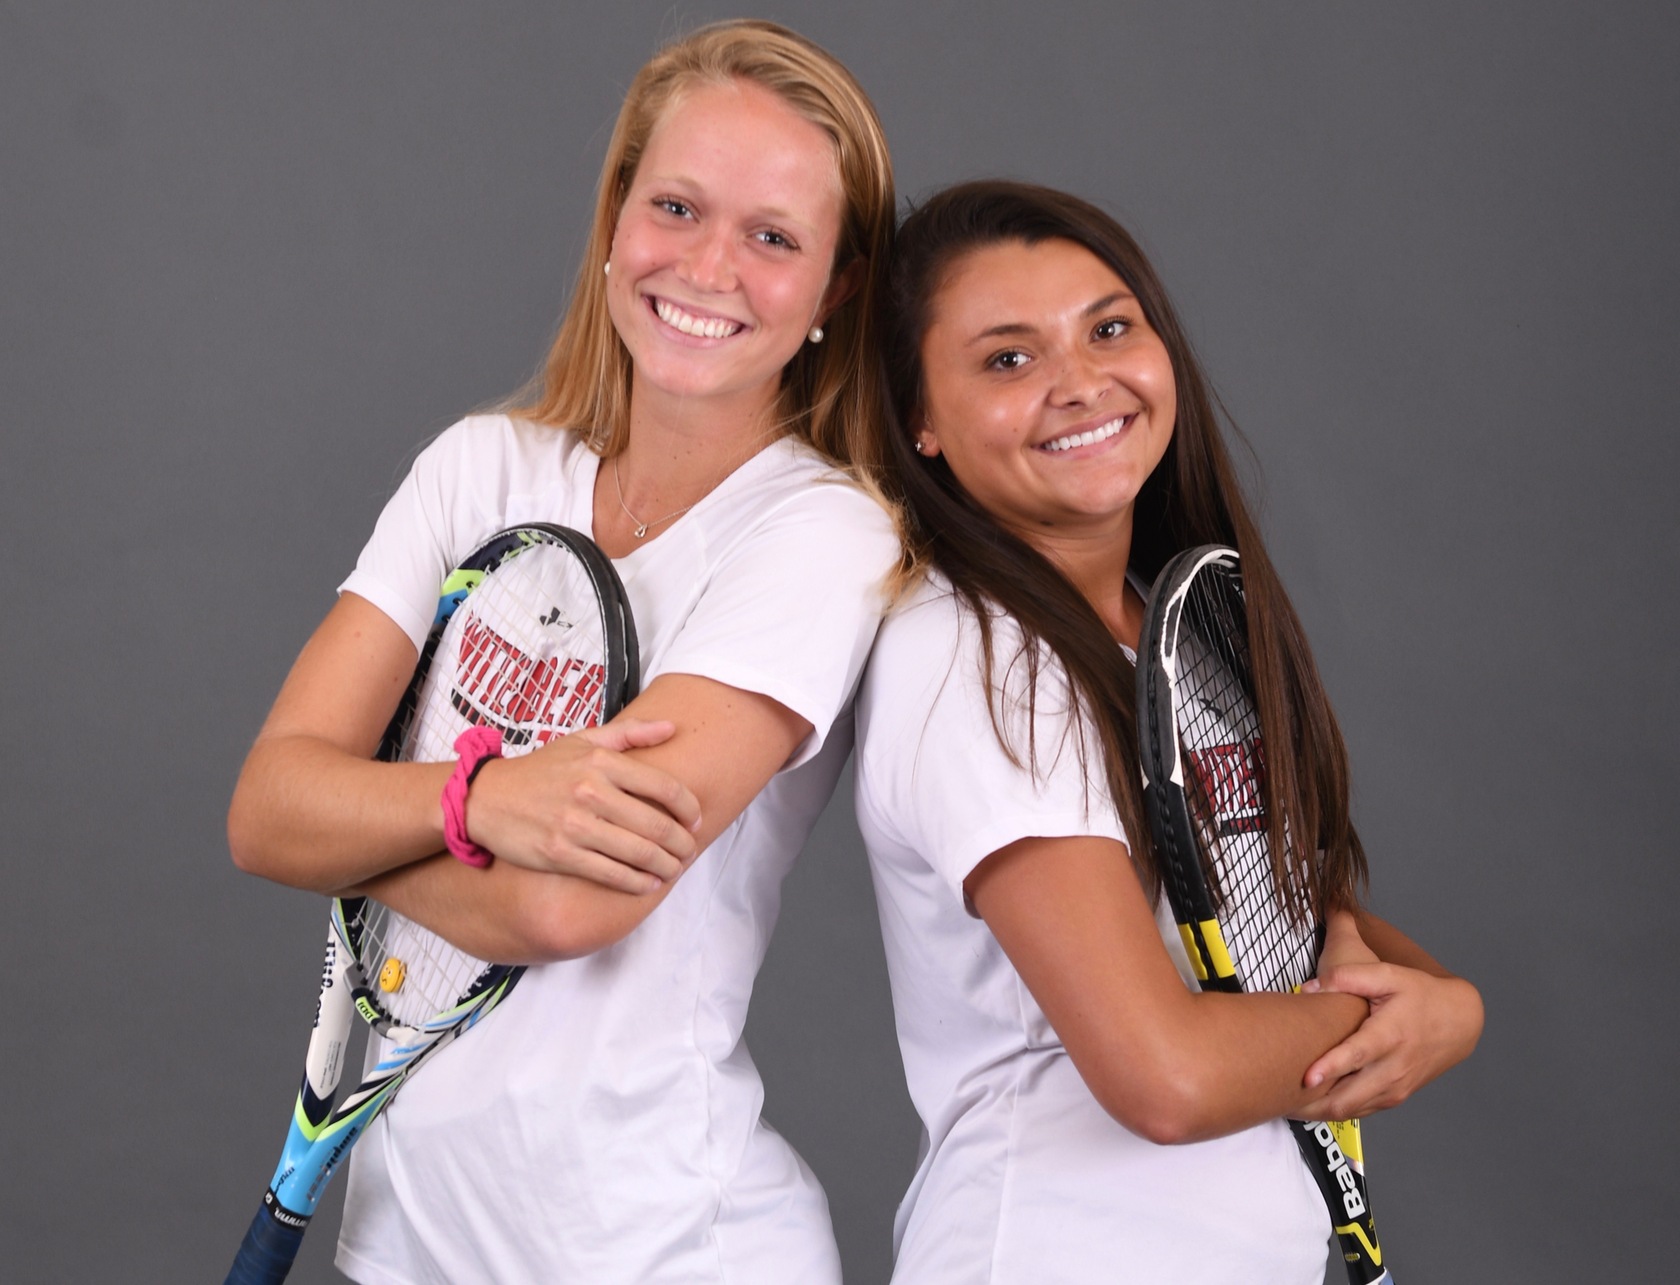 Senior Alivia Livesay (R) and junior Sarah Gallup (L) were both individual winners on Saturday in a 5-2 victory over Trine